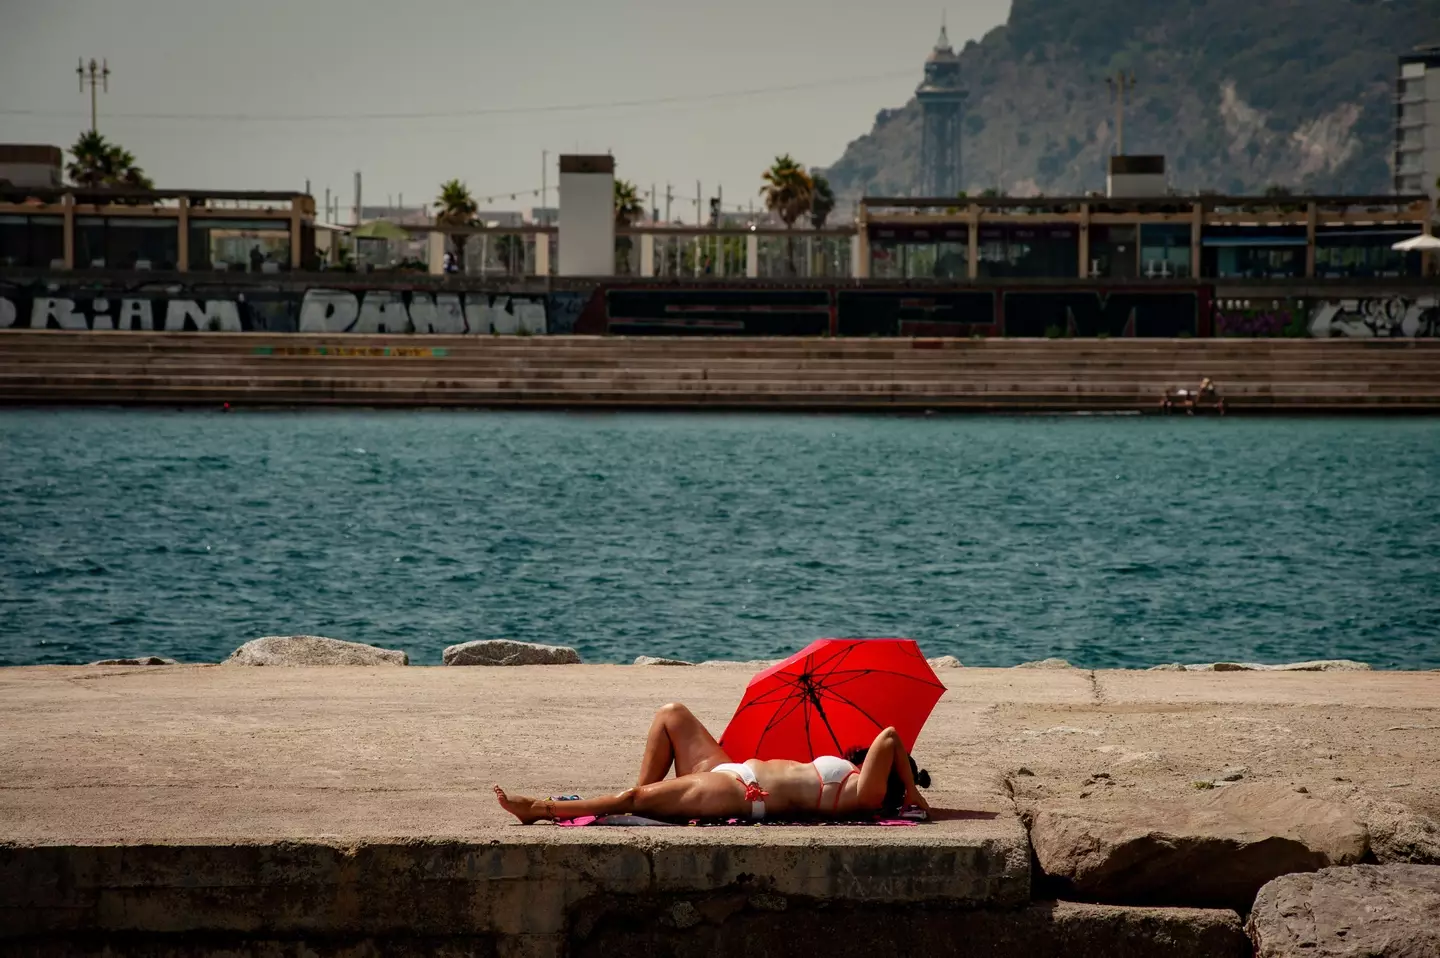 Spain is under a heatwave and prepares for record-breaking high temperatures.